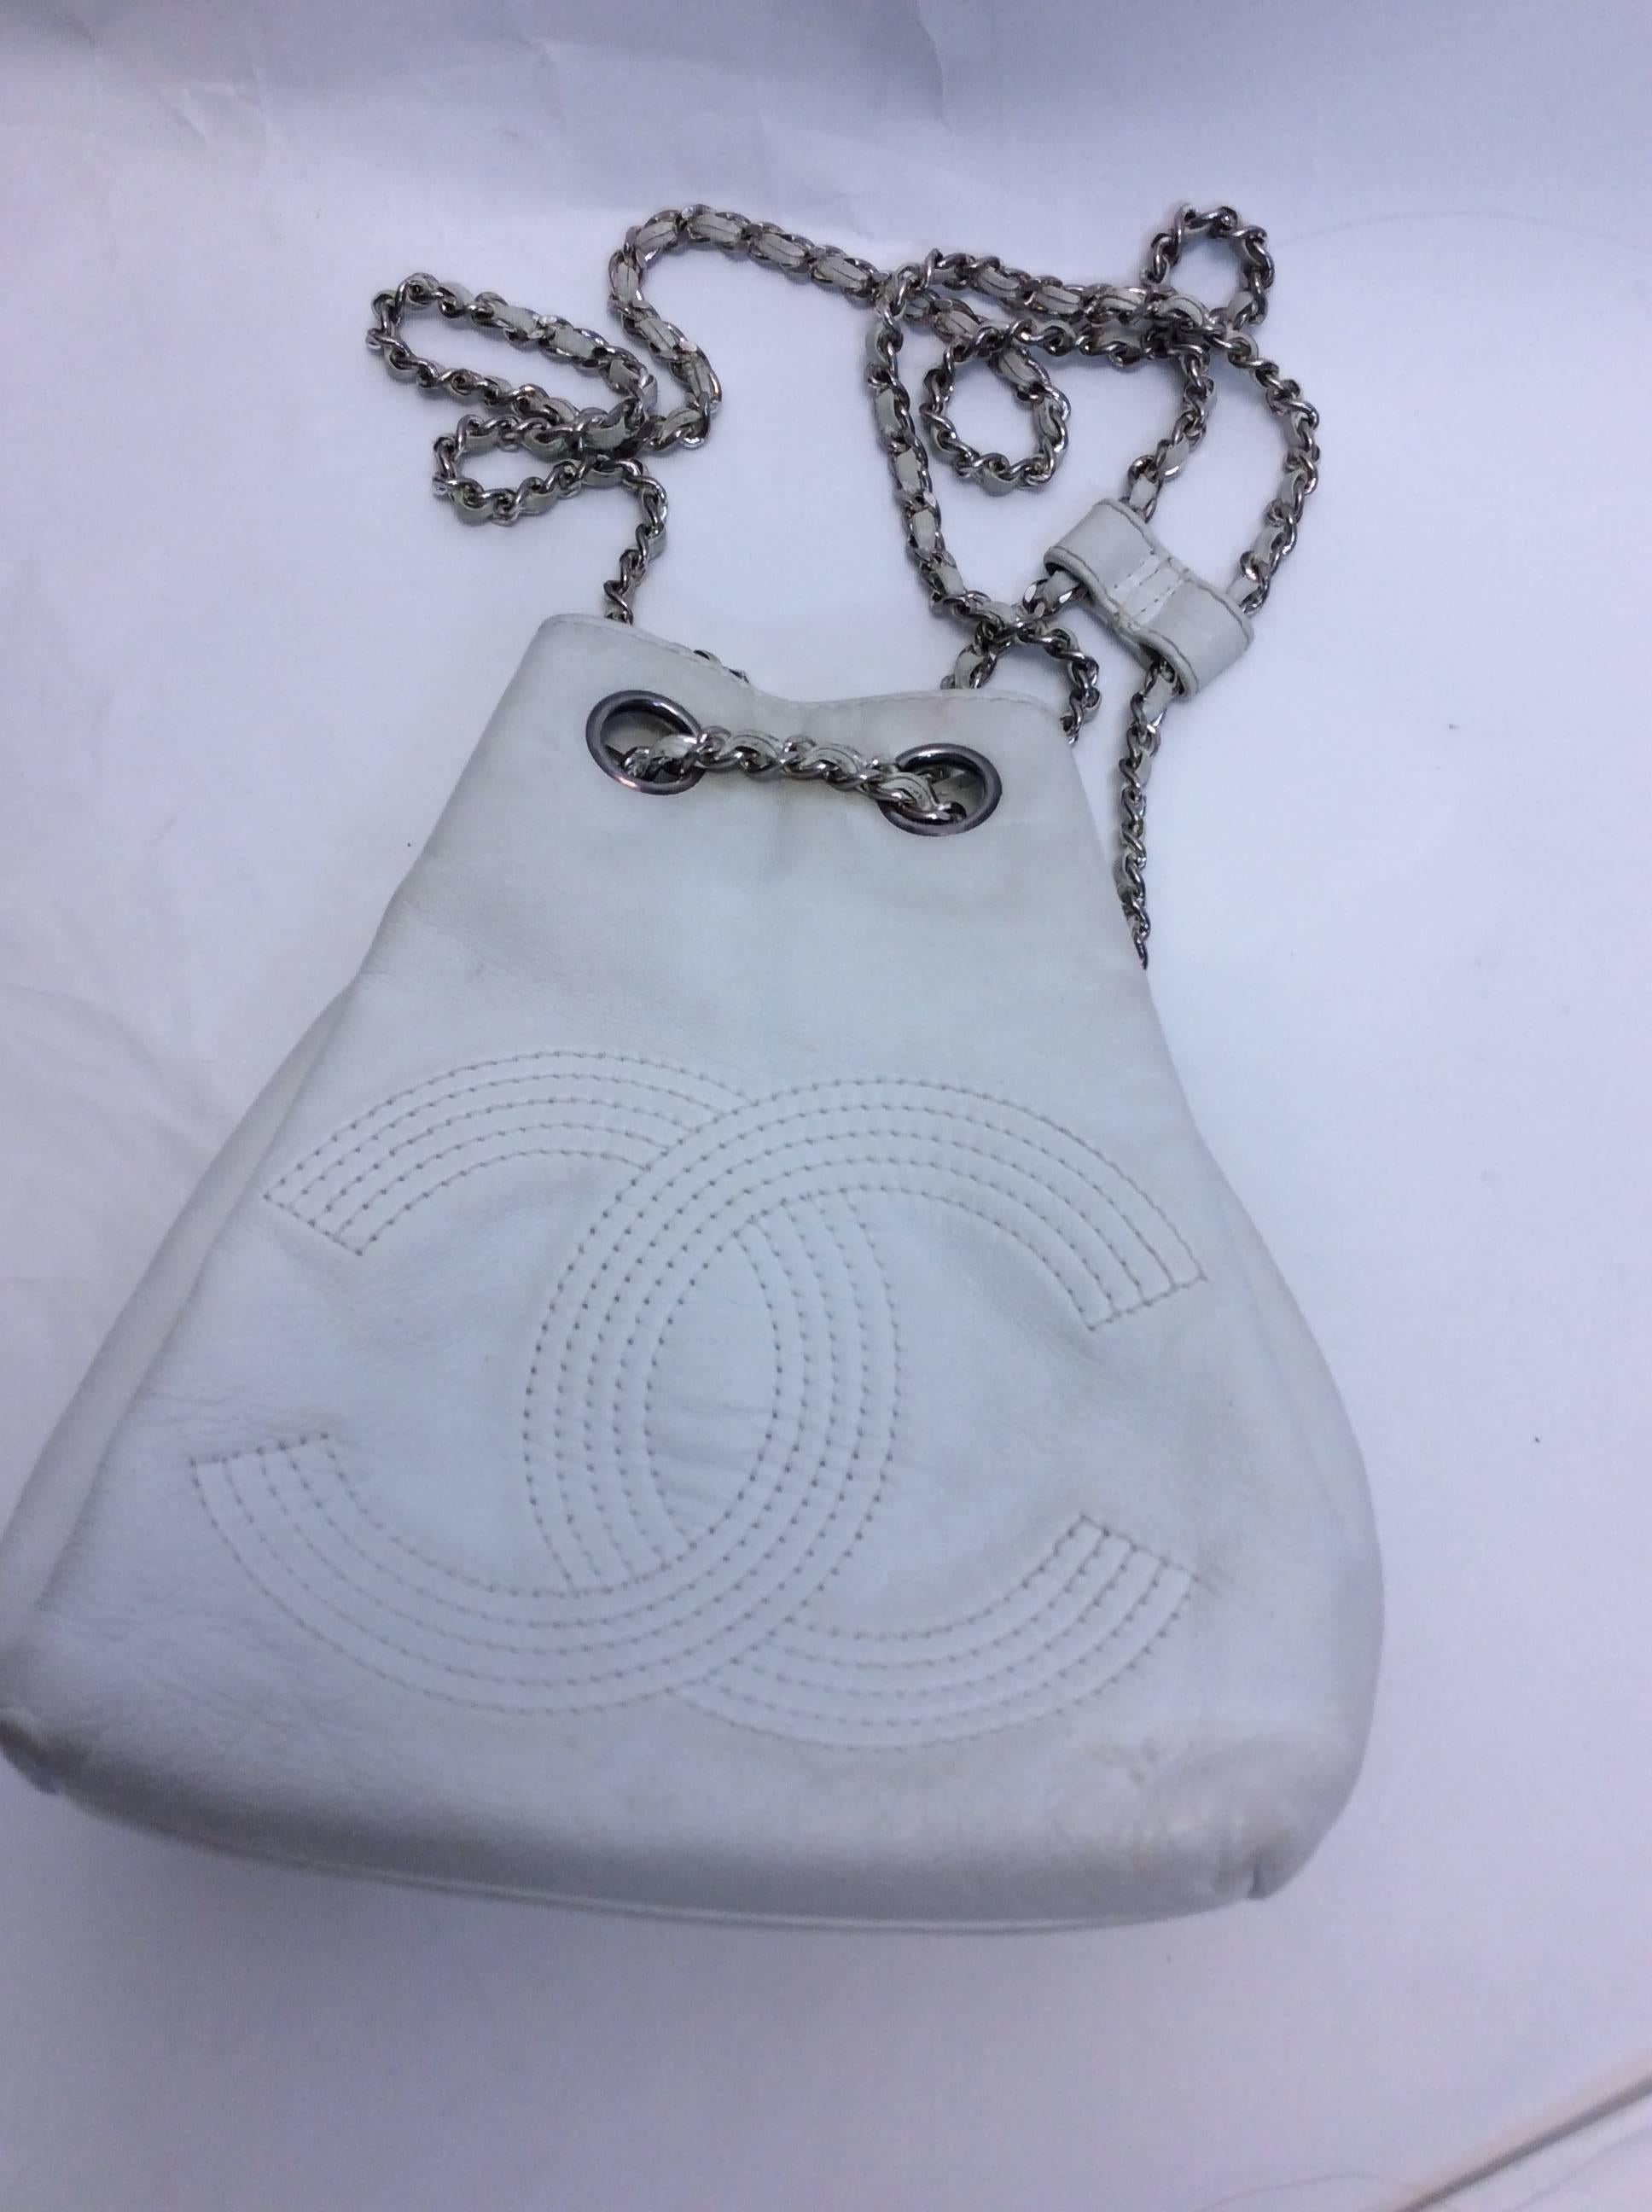 Chanel White Small Vintage Backpack
CC logo stitched in center of backpack
Silver chain backpack straps with leather center for adjustment 
*Condition is fair: Pen marks on inside and staining on exterior. Please reference photos
Comes with coin